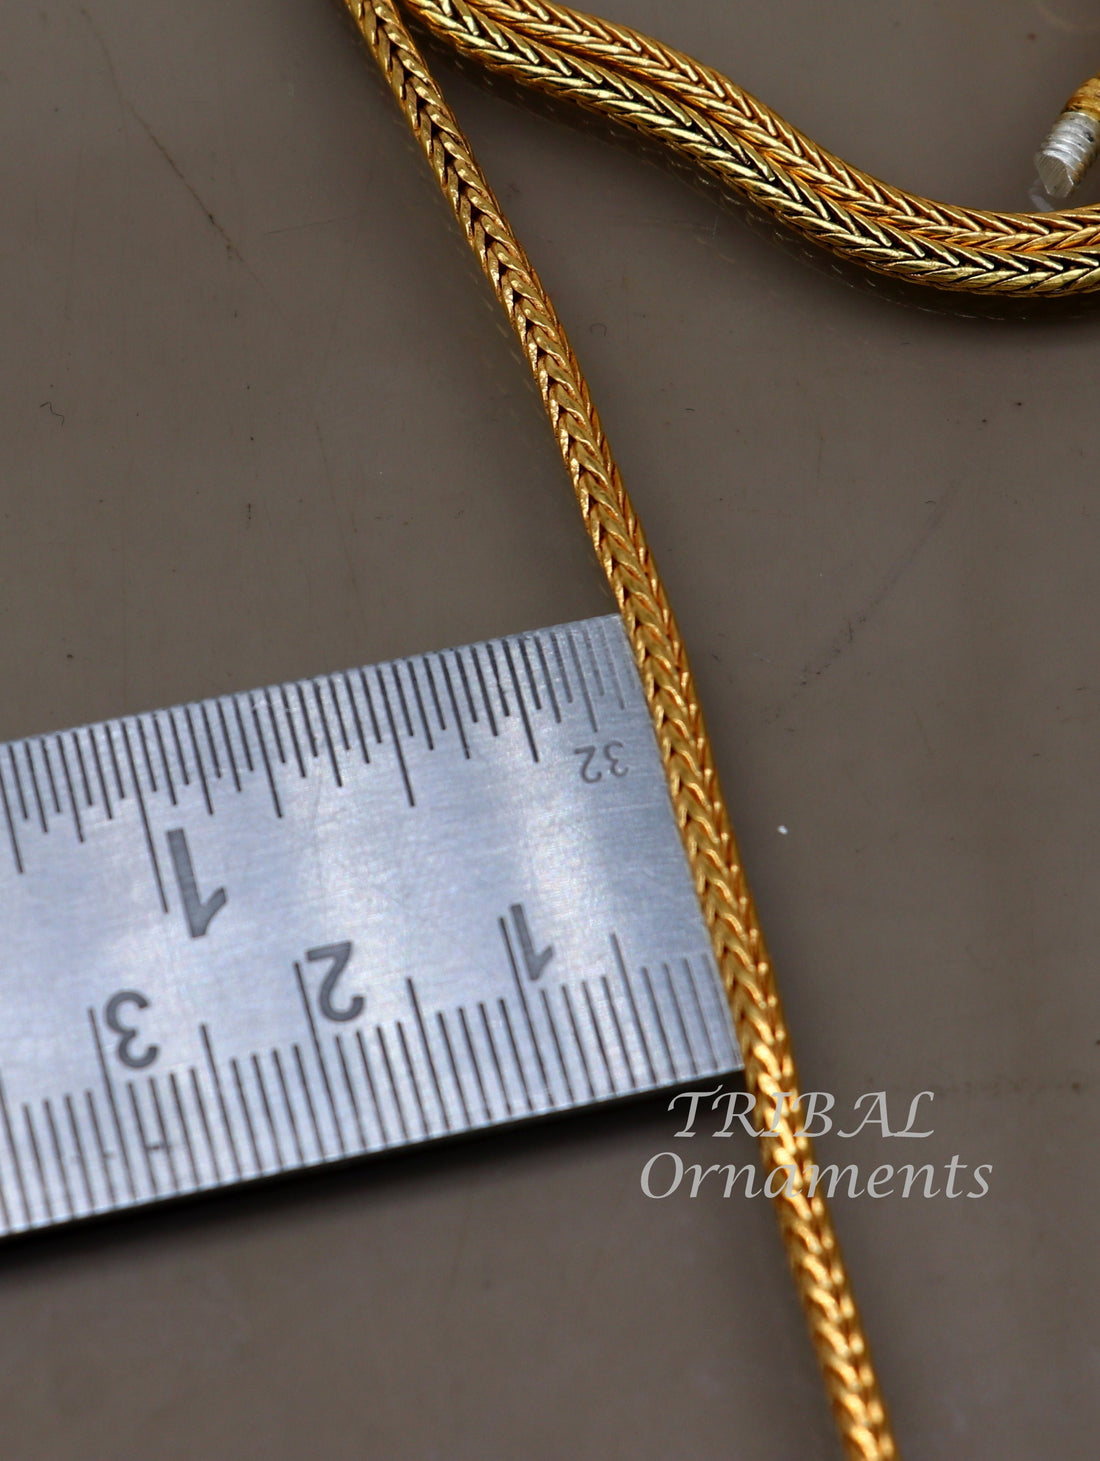 16" to 30" long screw chain 925 sterling silver handmade Gold polished wheat chain pendant chain, necklace chain, silver chain trendy nch197 - TRIBAL ORNAMENTS